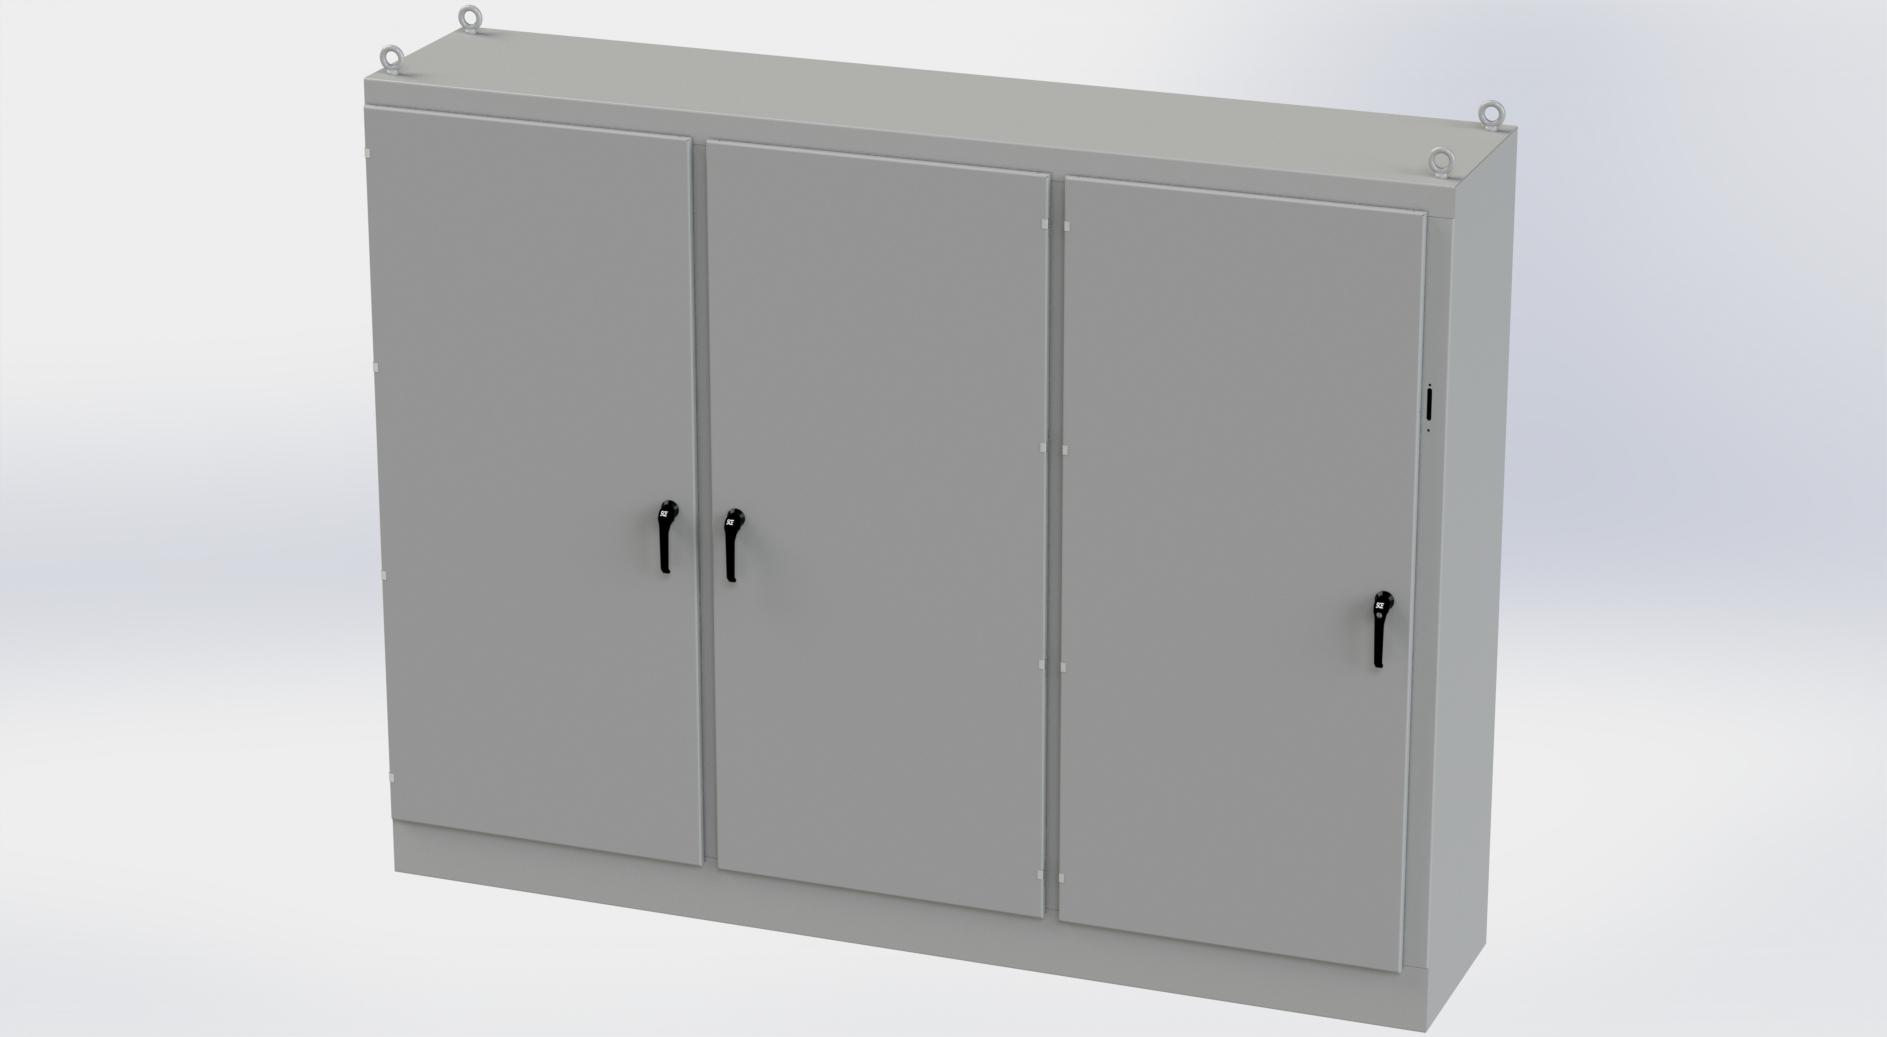 Saginaw Control SCE-90XM3EW24G 3DR XM Enclosure, Height:90.00", Width:117.50", Depth:24.00", ANSI-61 gray powder coating inside and out. Sub-panels are powder coated white.